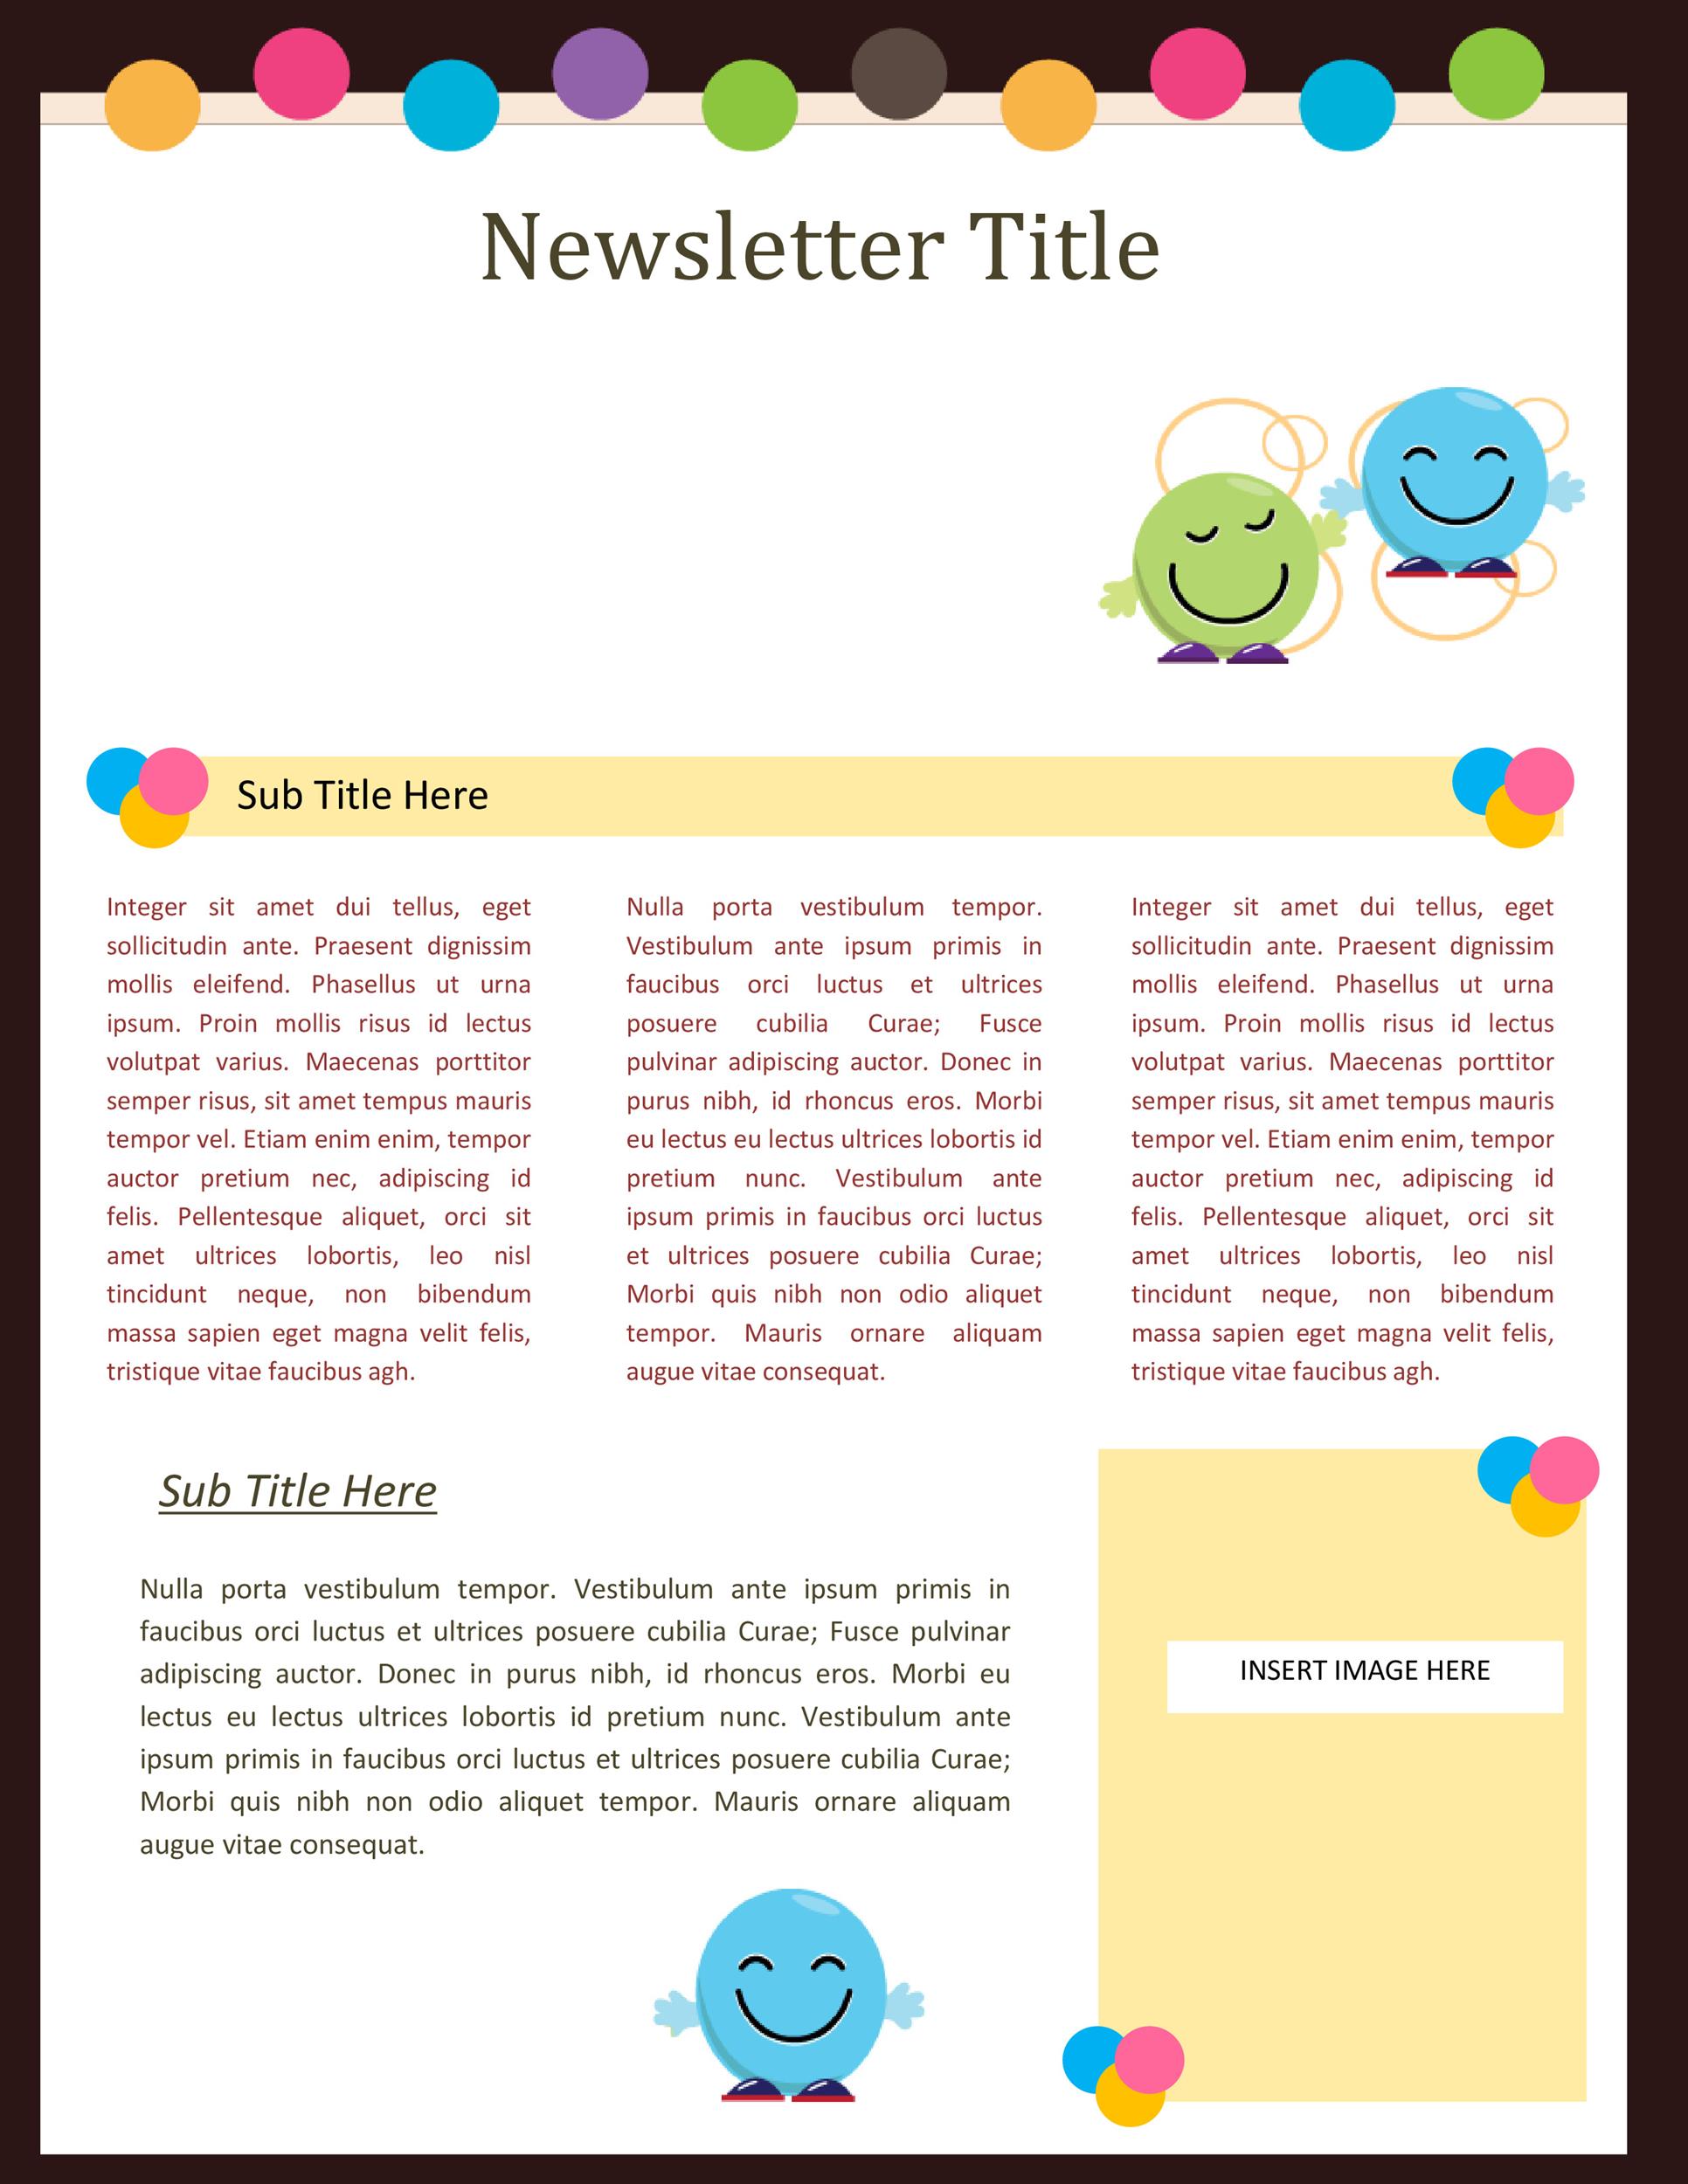 work-newsletter-templates-tutore-org-master-of-documents